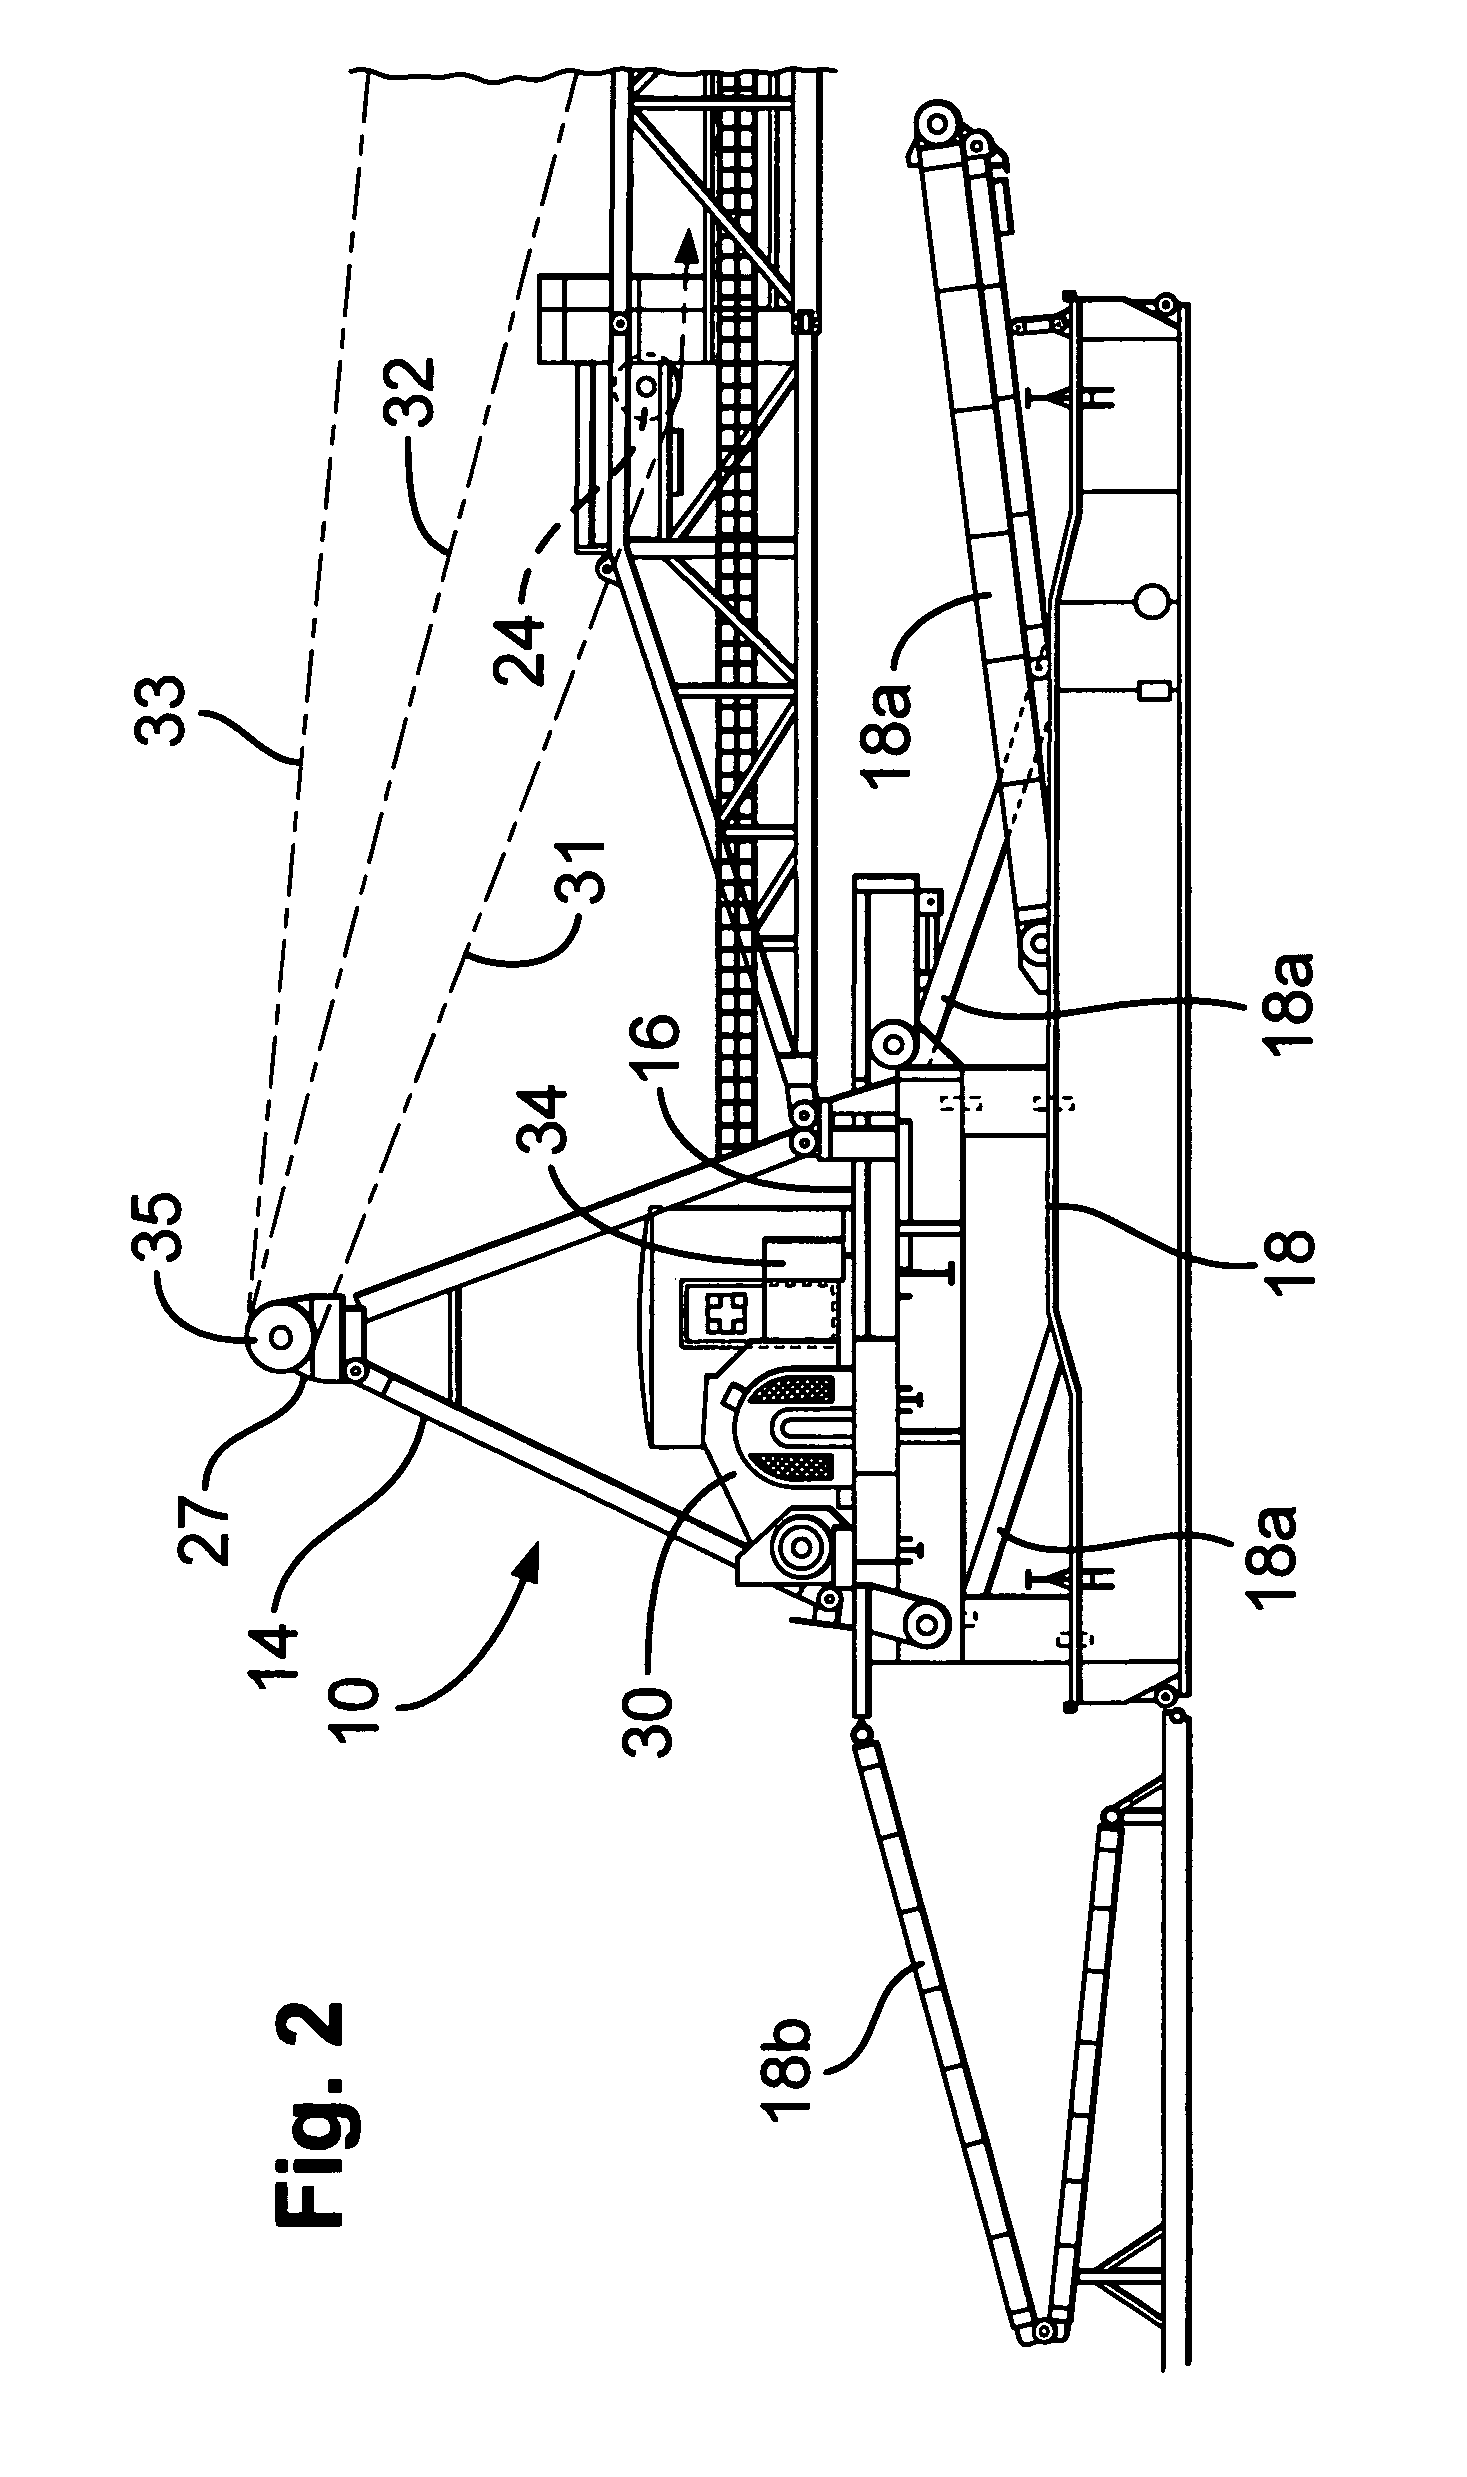 Methods and systems for raising and lowering a rig mast and substructure by remote control